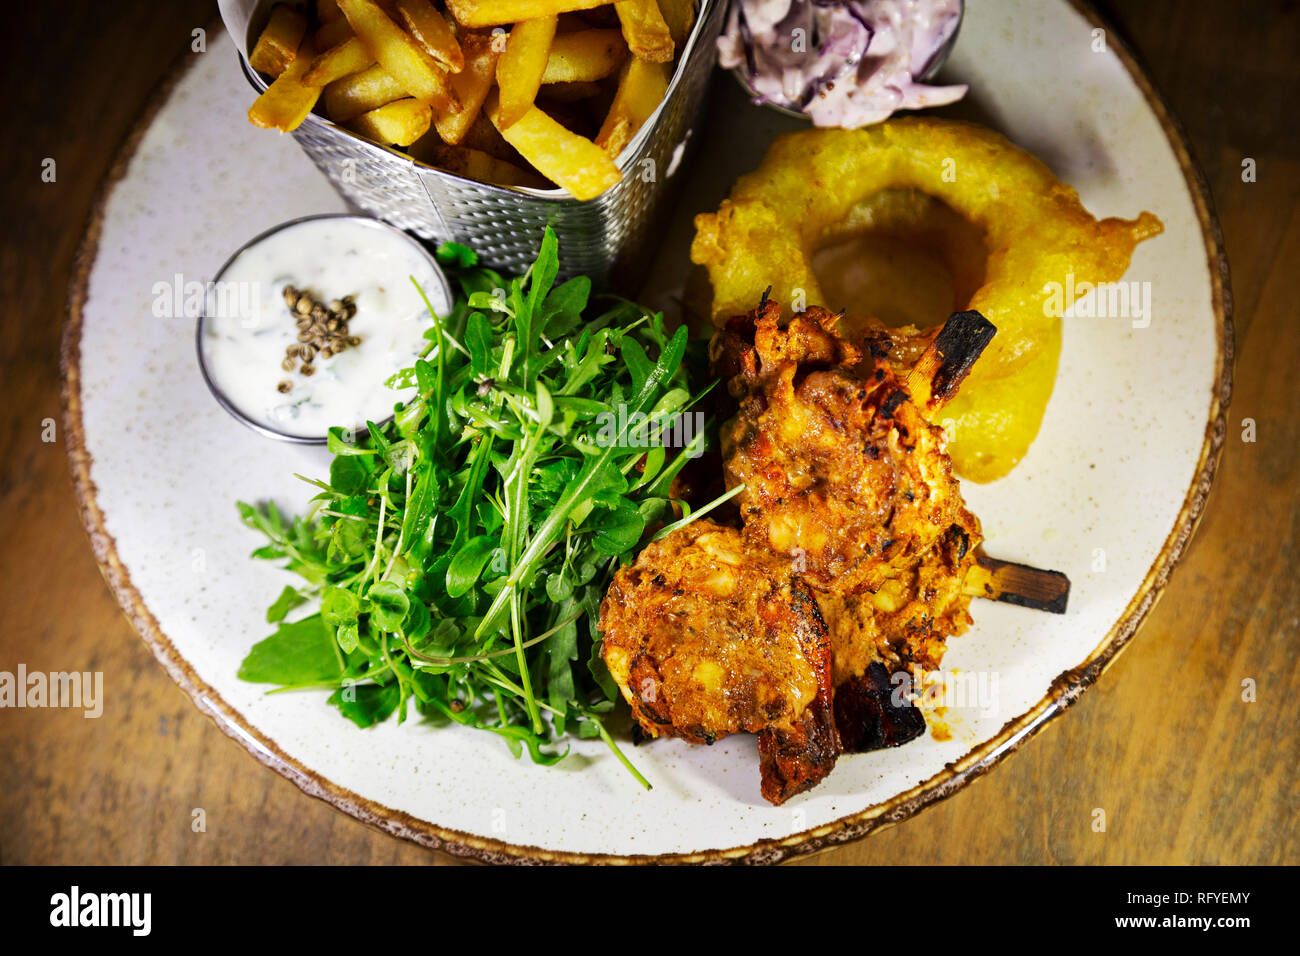 Grilled king prawns served with fries, onion rings and dips. The dish is garnished with rocket. Stock Photo